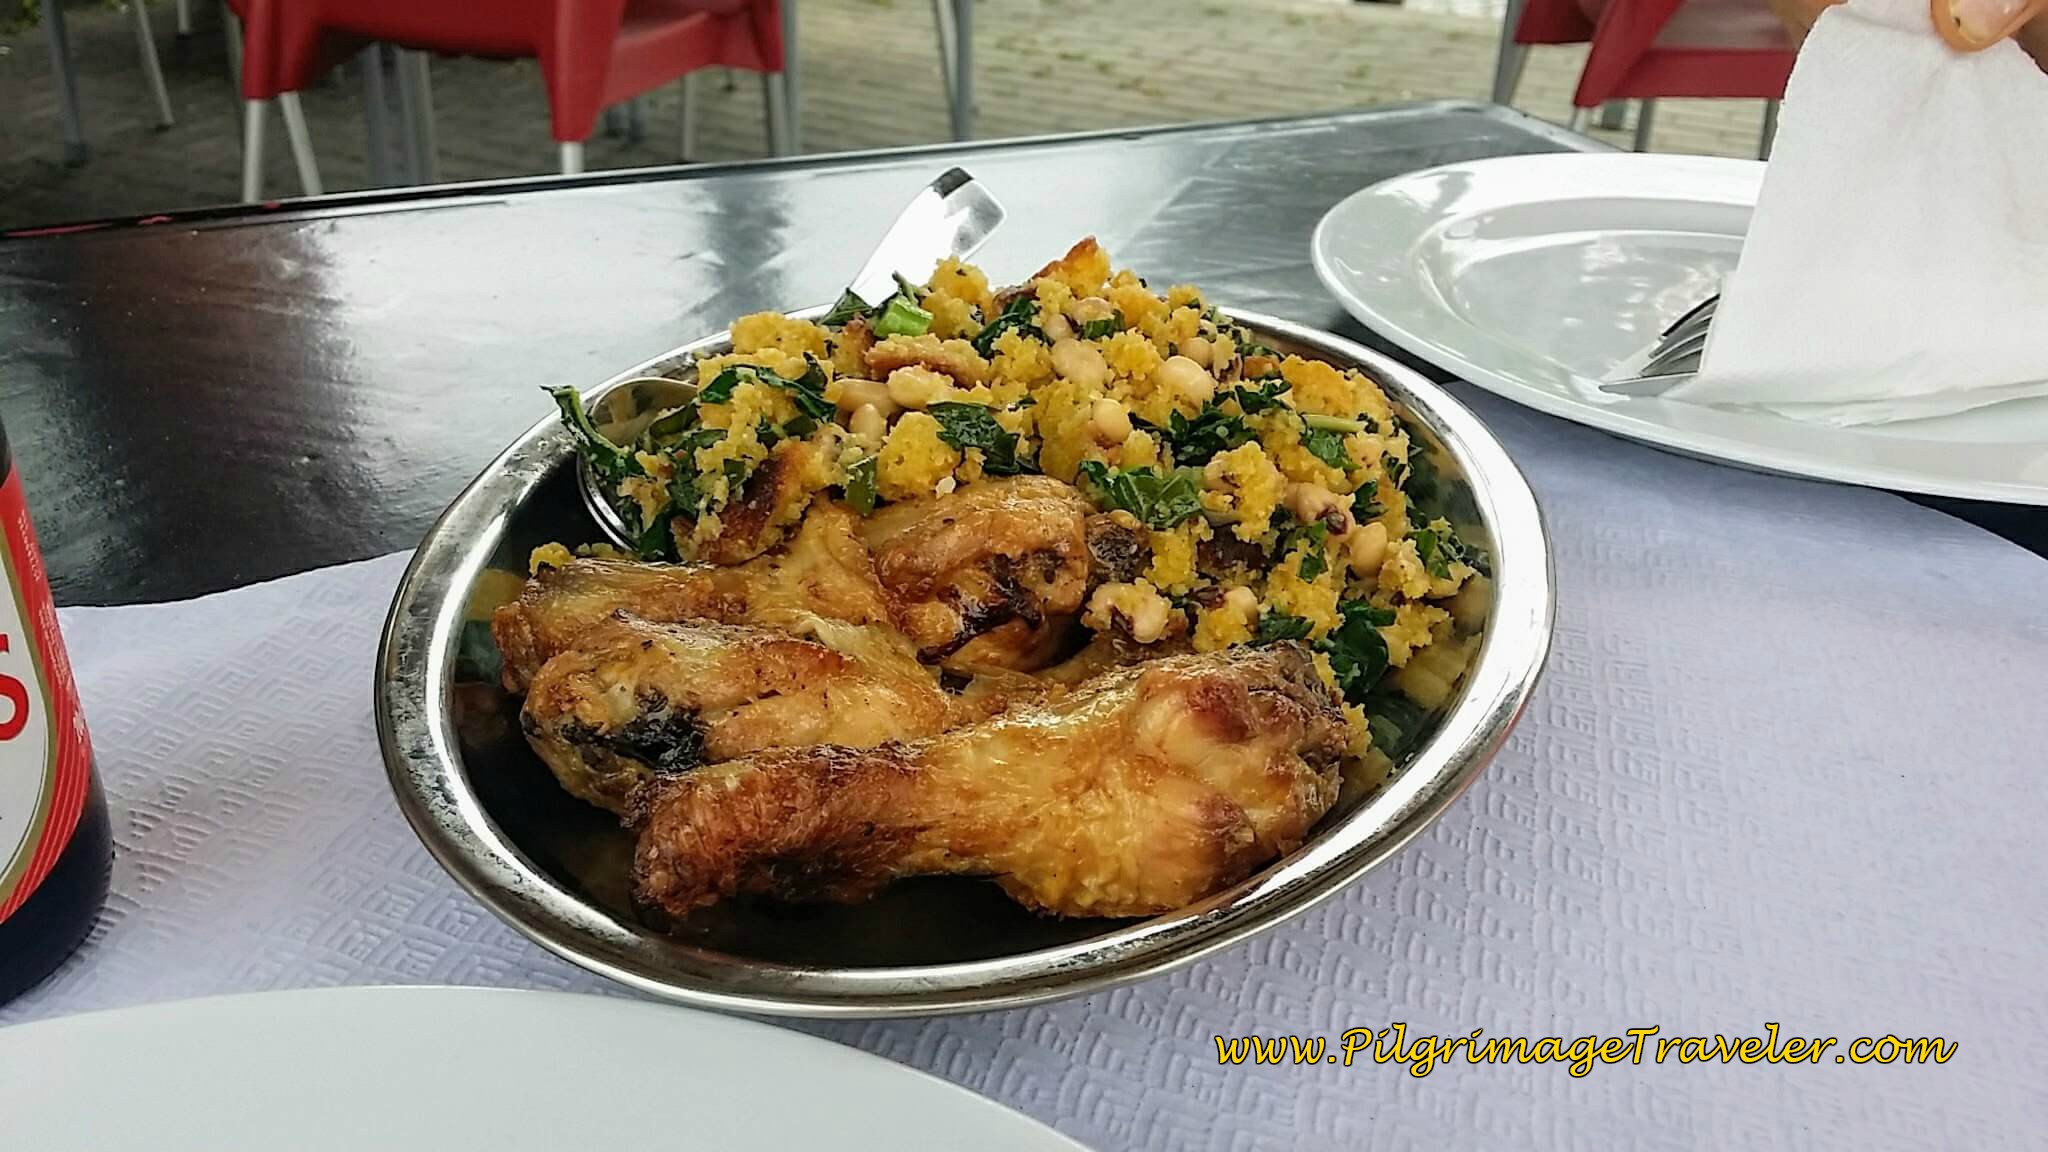 Fried Chicken at the Churrasqueira Lendas na Braza in Mealhada, Portugal